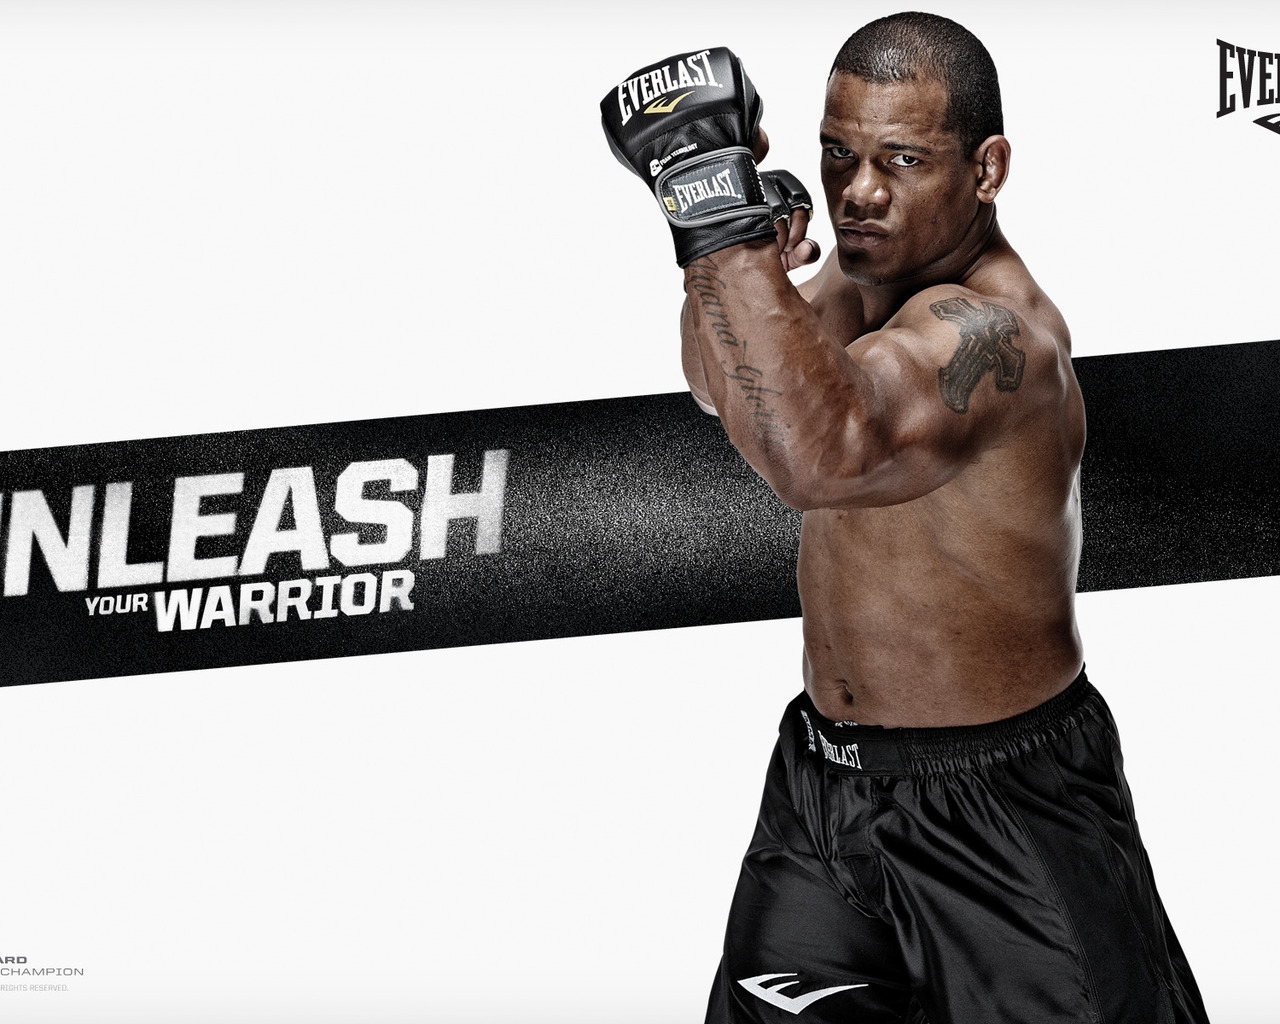 Hector Lombard for 1280 x 1024 resolution